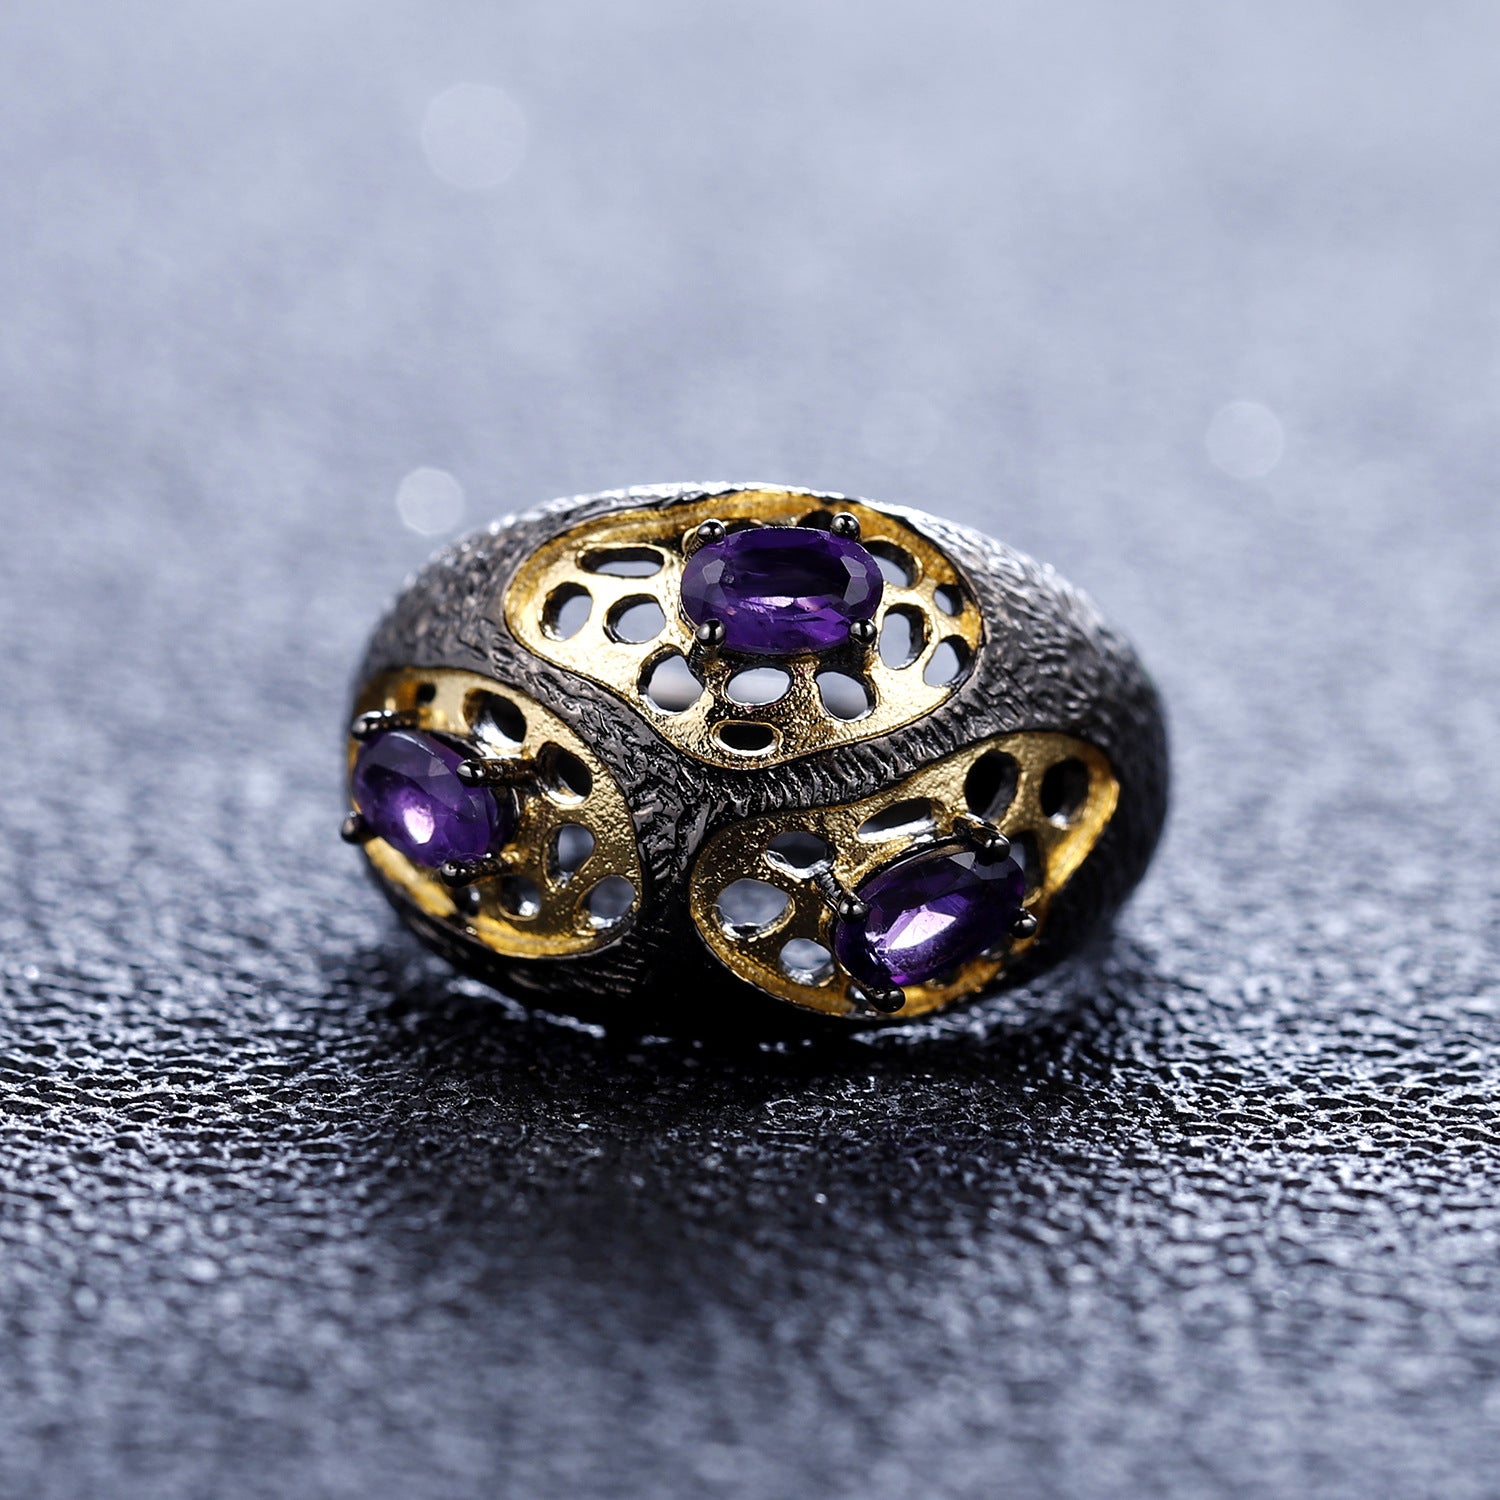 Antique Amethyst Ring - HERS